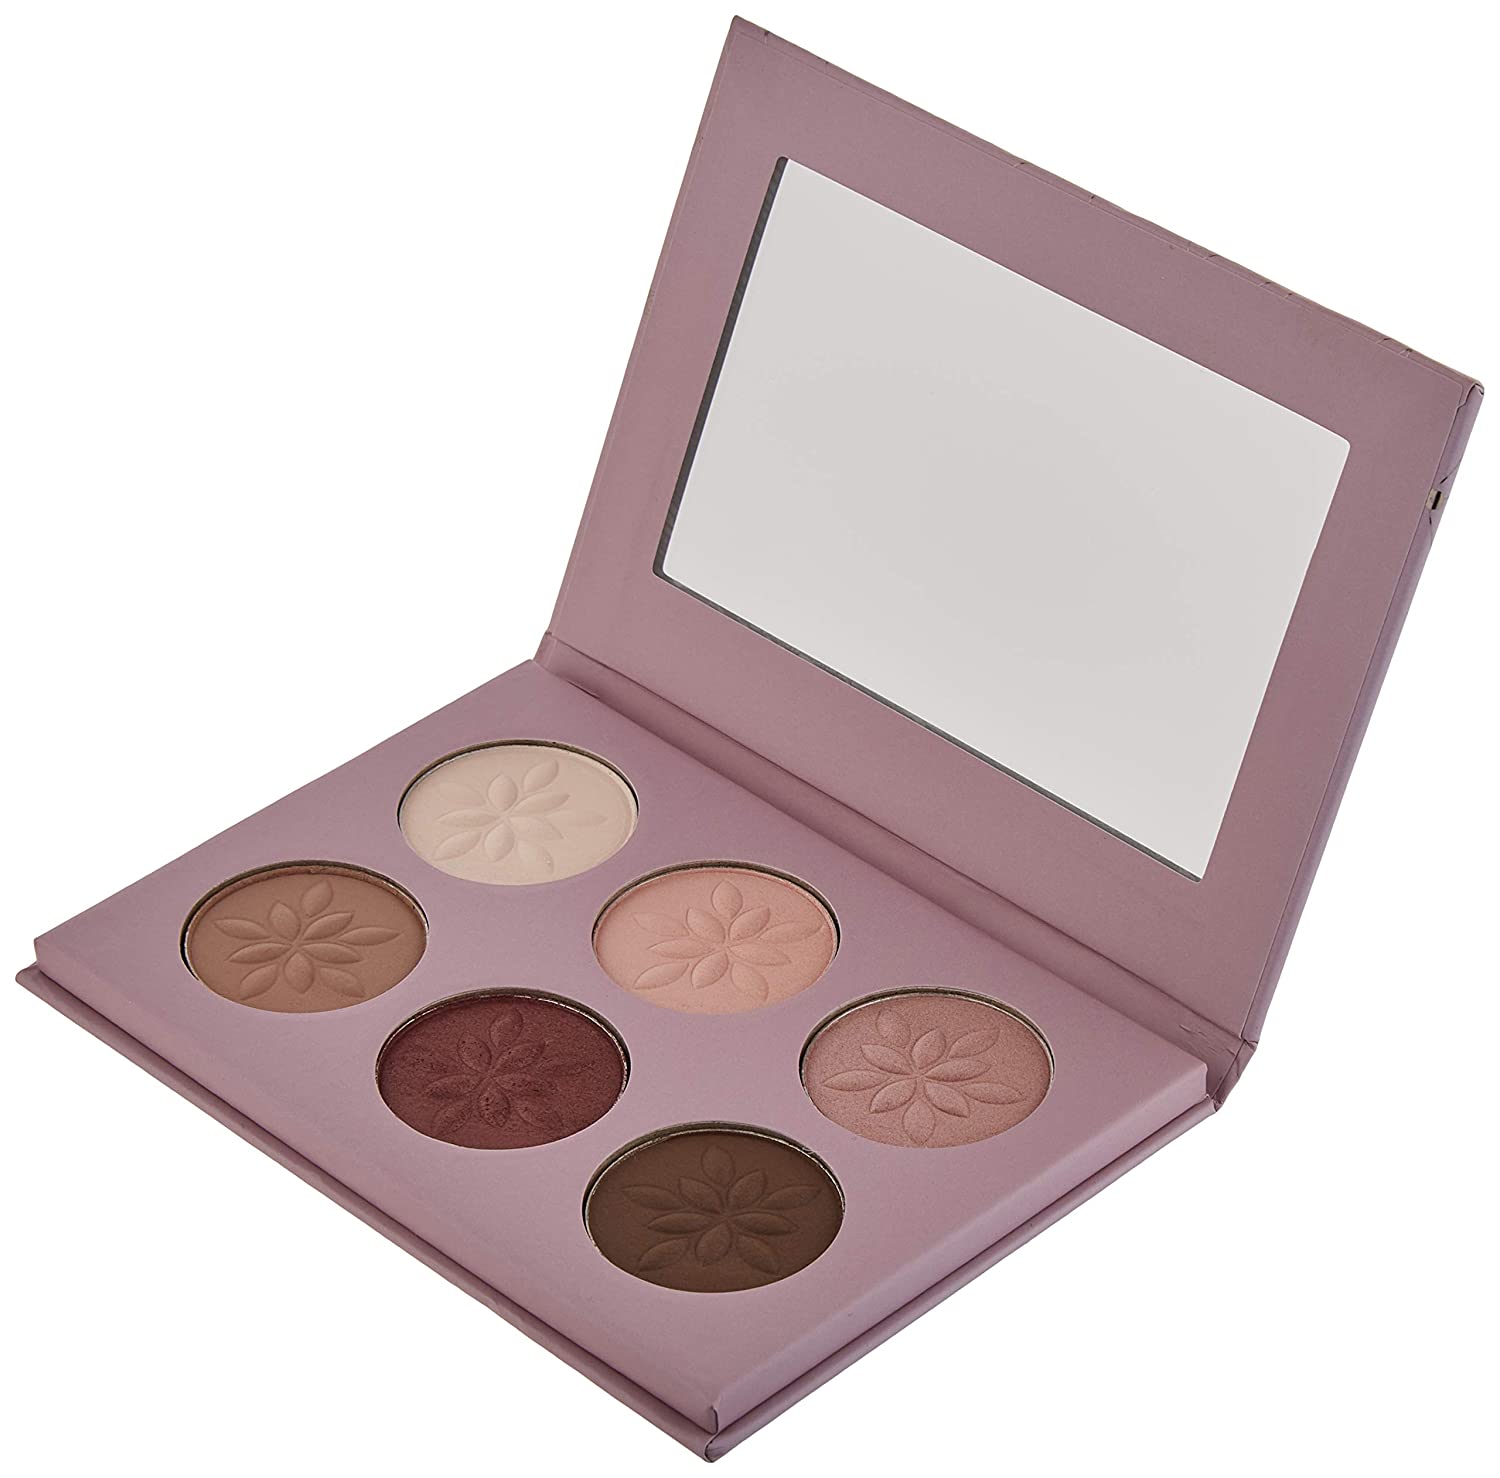 Lavera Mineral Eye Shadow Selection 02 Blooming Pastel Limited Edition